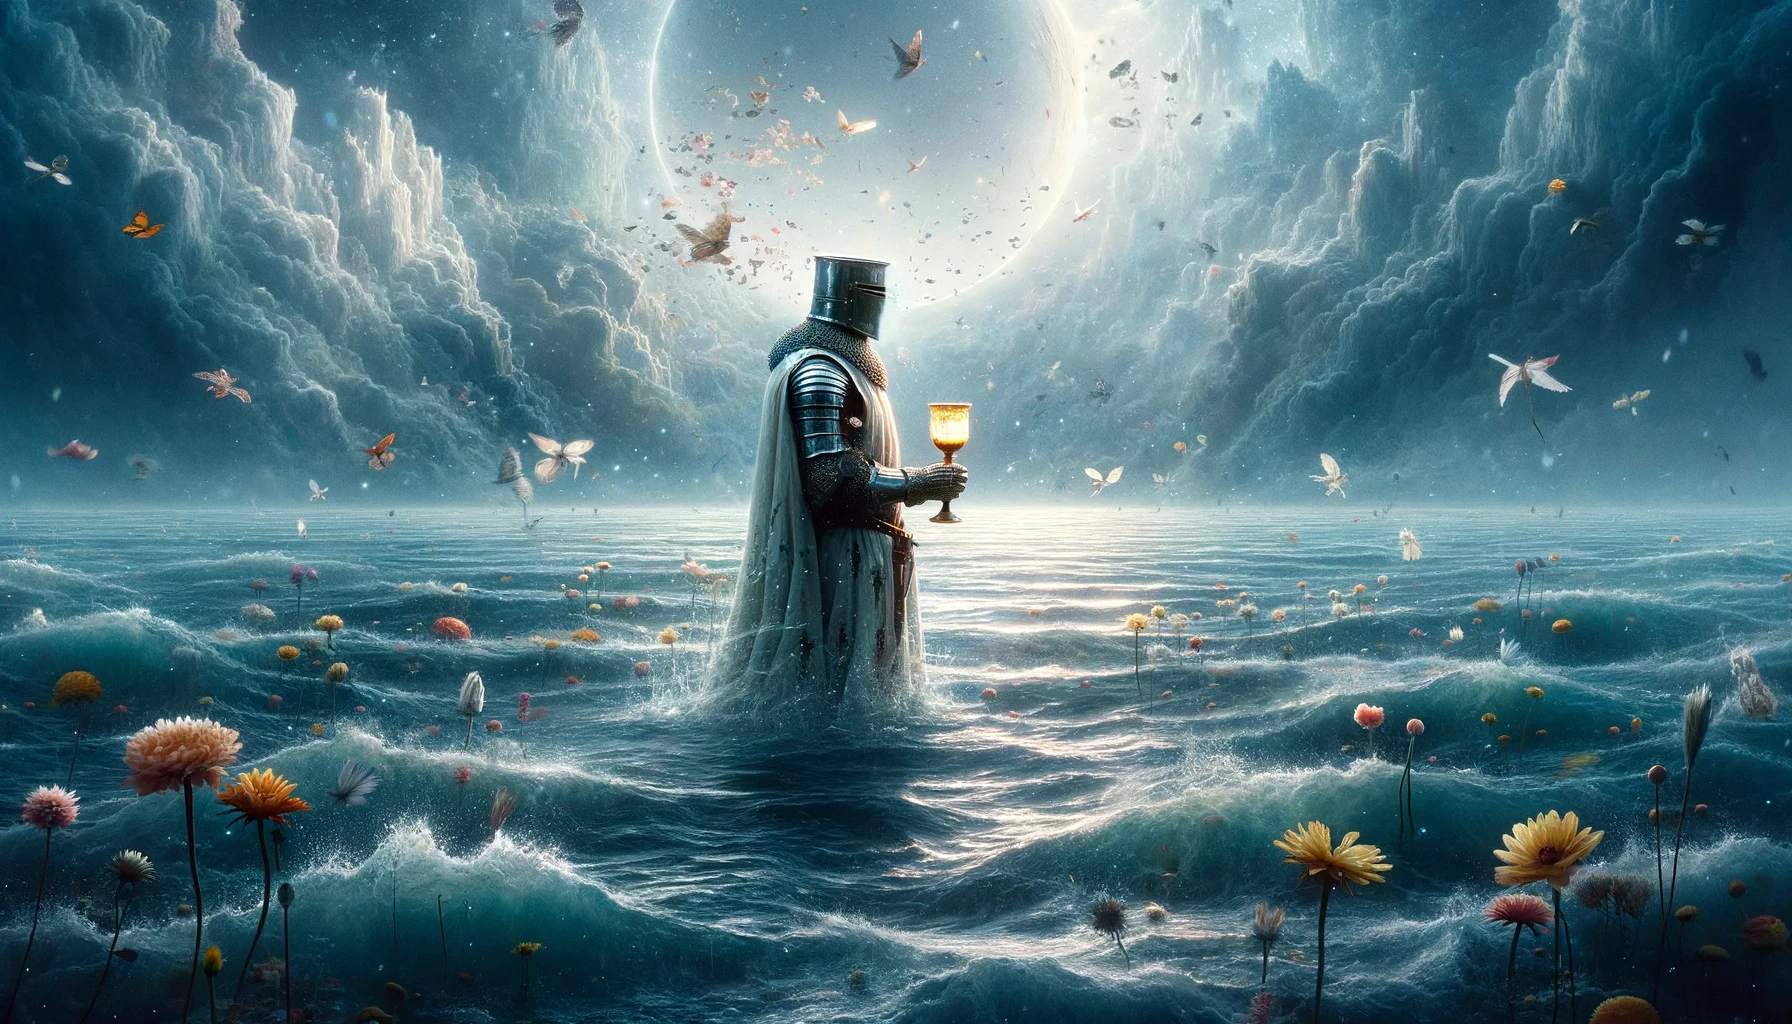 An image showcasing a knight with a chalice surrounded by a vast ocean and floating flowers representing the enigmatic and introspective nature of T